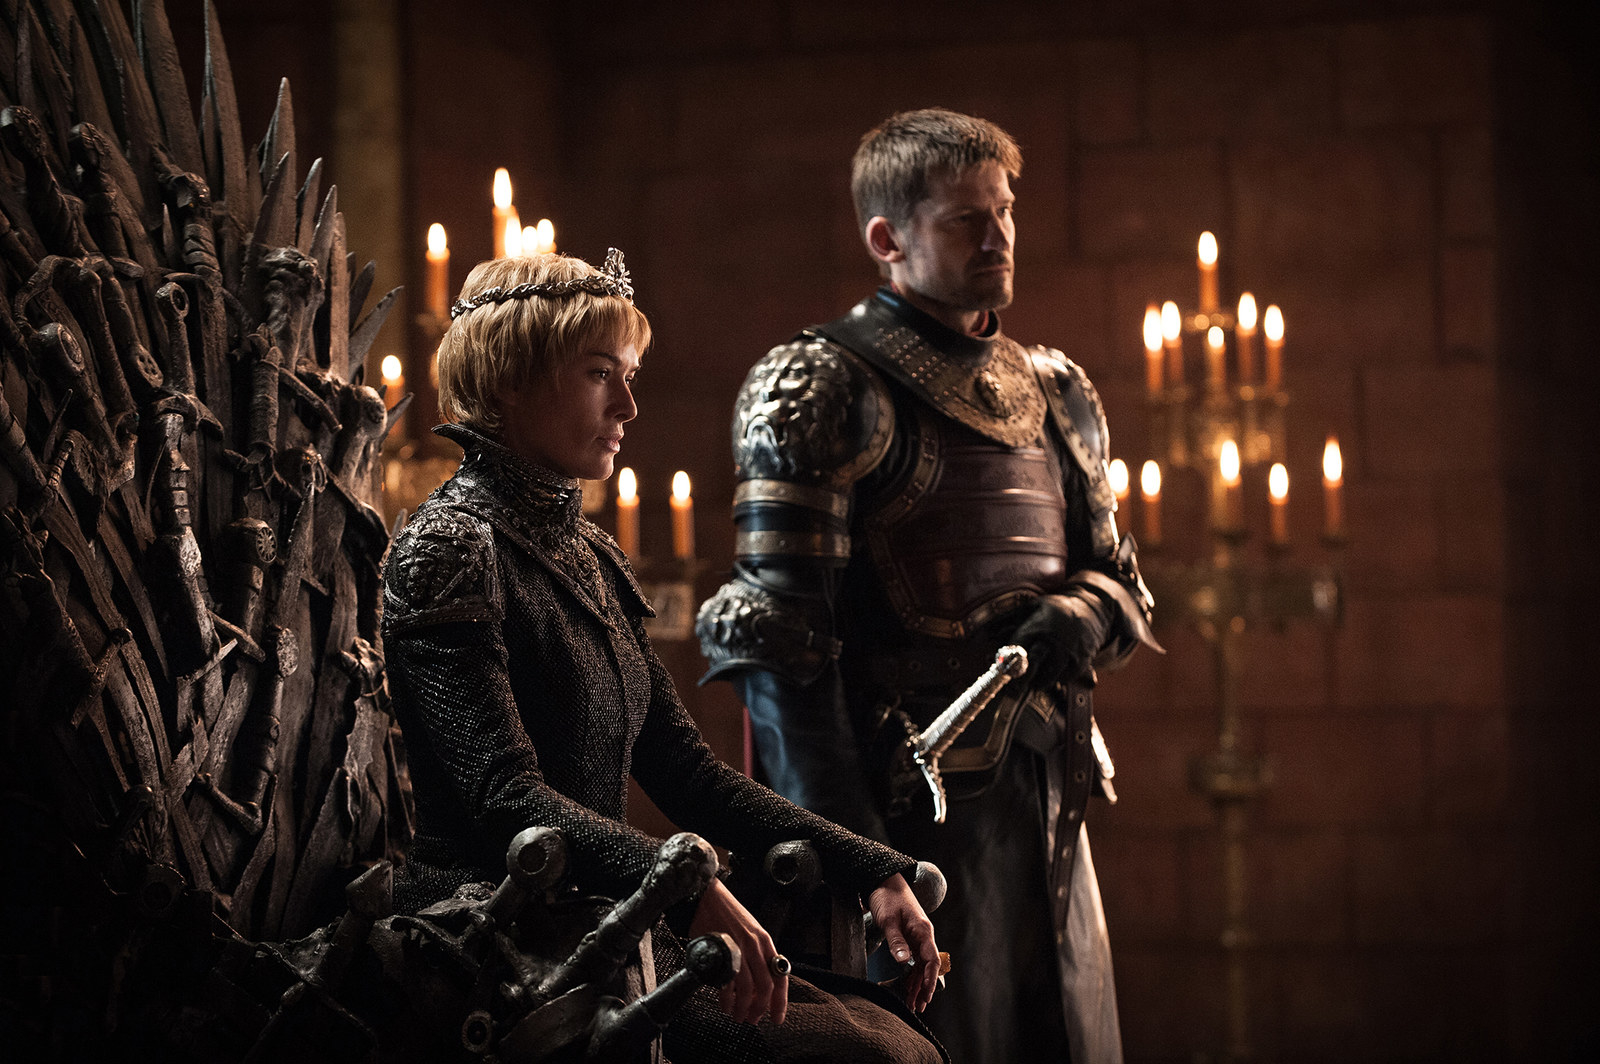 There's Now A Way To Watch "Game Of Thrones" On Hulu In Case You Need A